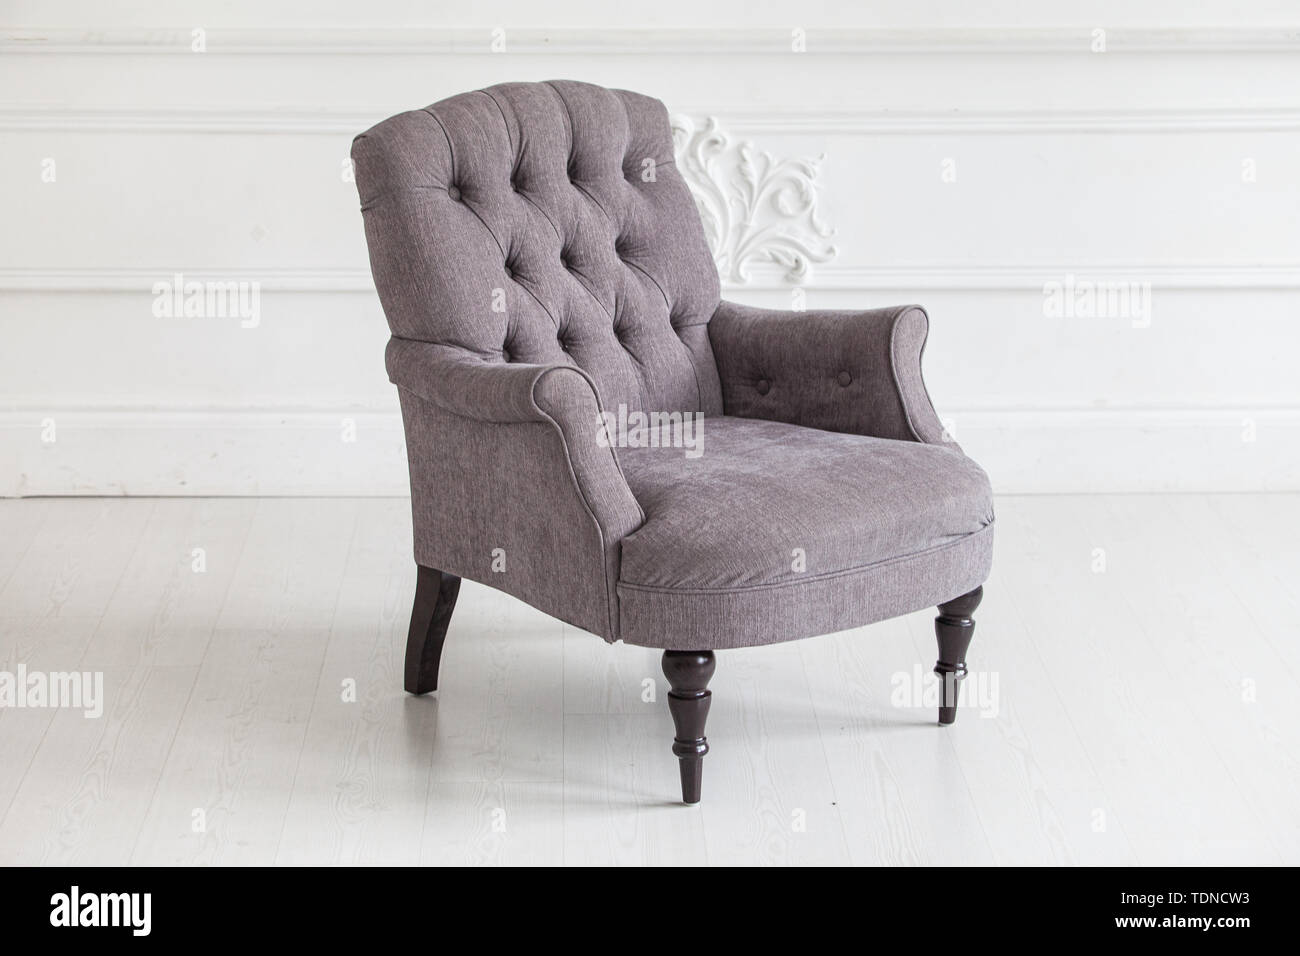 Rococo Armchair High Resolution Stock Photography and Images - Alamy